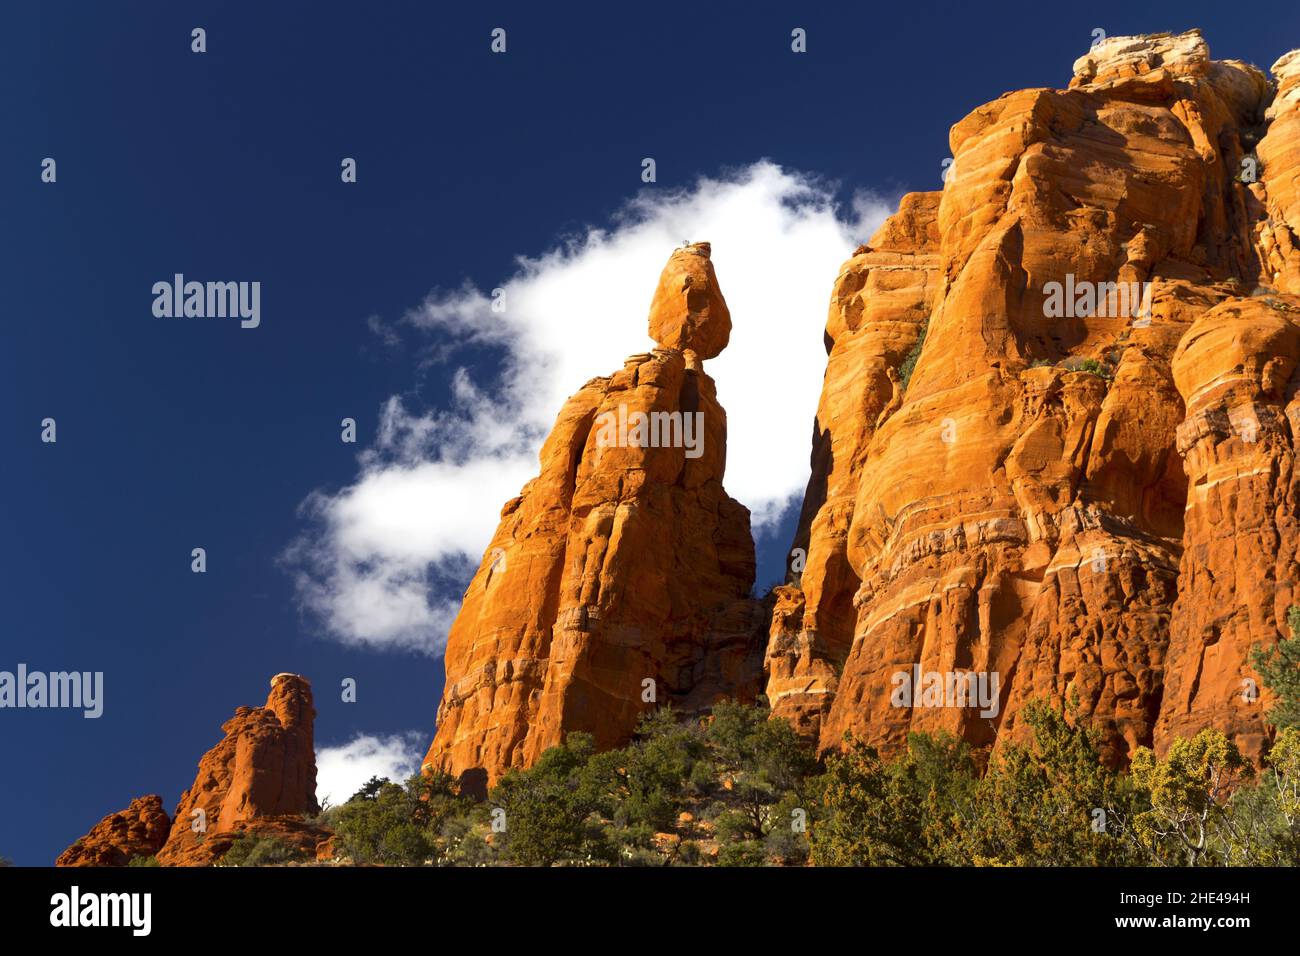 Scenic Red Rock Formations Desert Landscape View. Blue Sky and White Clouds above Mountain Top. Beautiful Autumn Day Hiking Sedona, Arizona USA Stock Photo